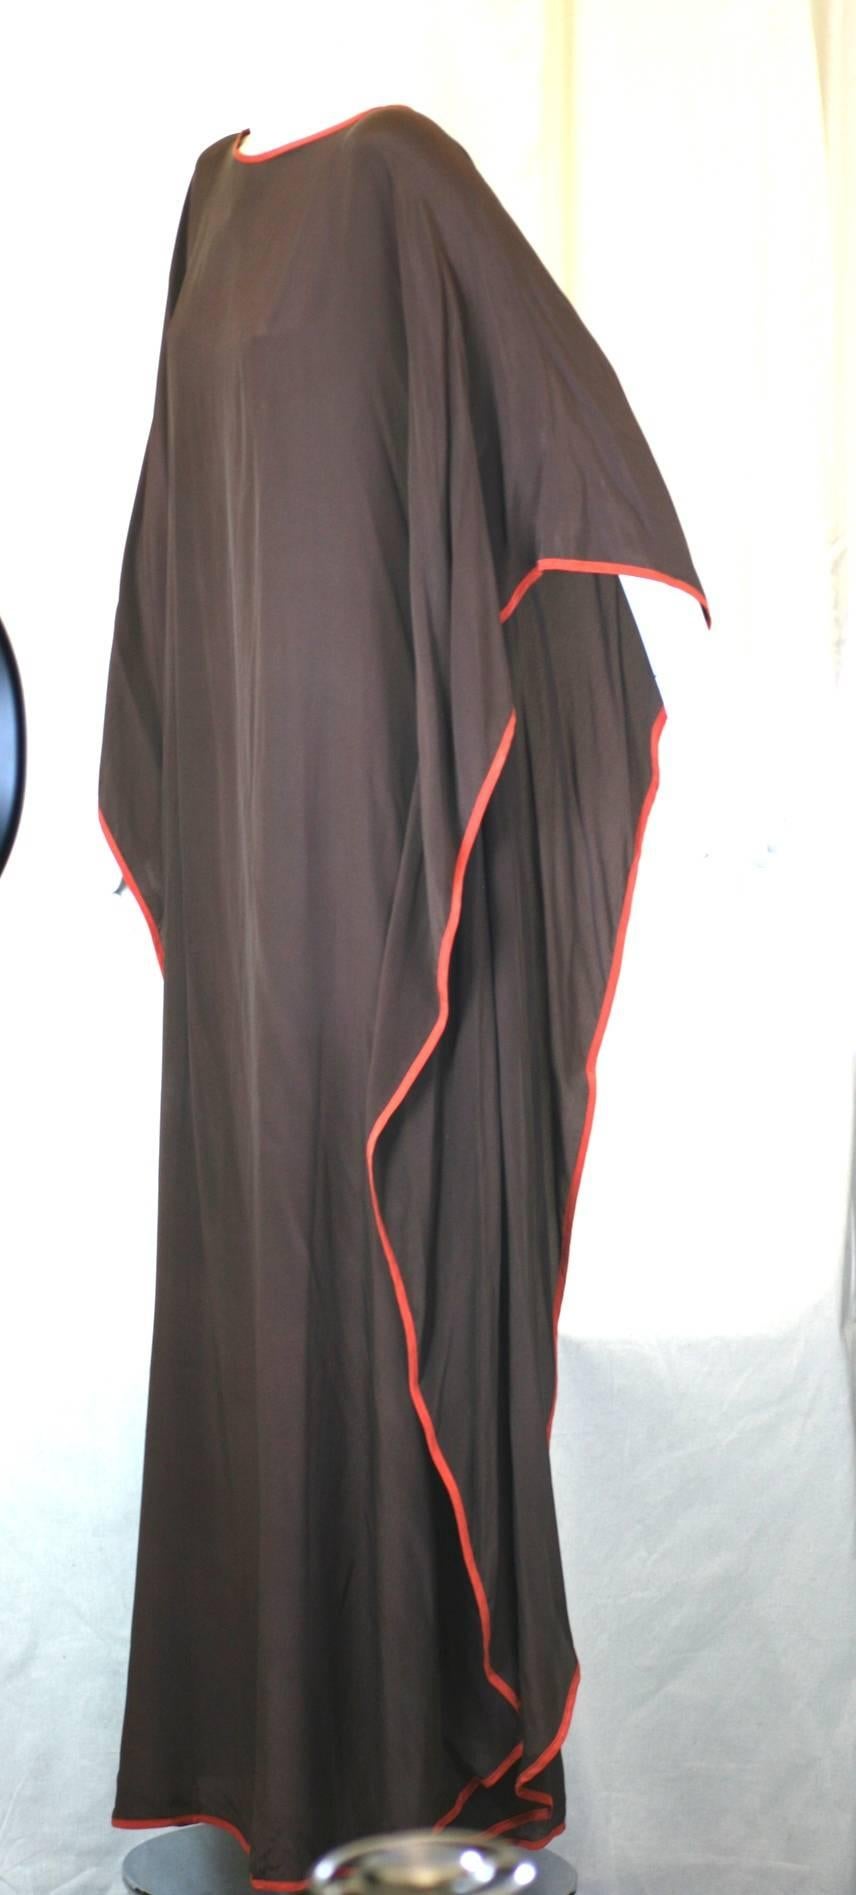 Renata Silk Crepe Caftan in chocolate brown with orange piping. Garment is basically a large rectangle of silk crepe folded in half at shoulder, and tacked at waist on both side seams. Garment is completely open on sides below waist.
Works well